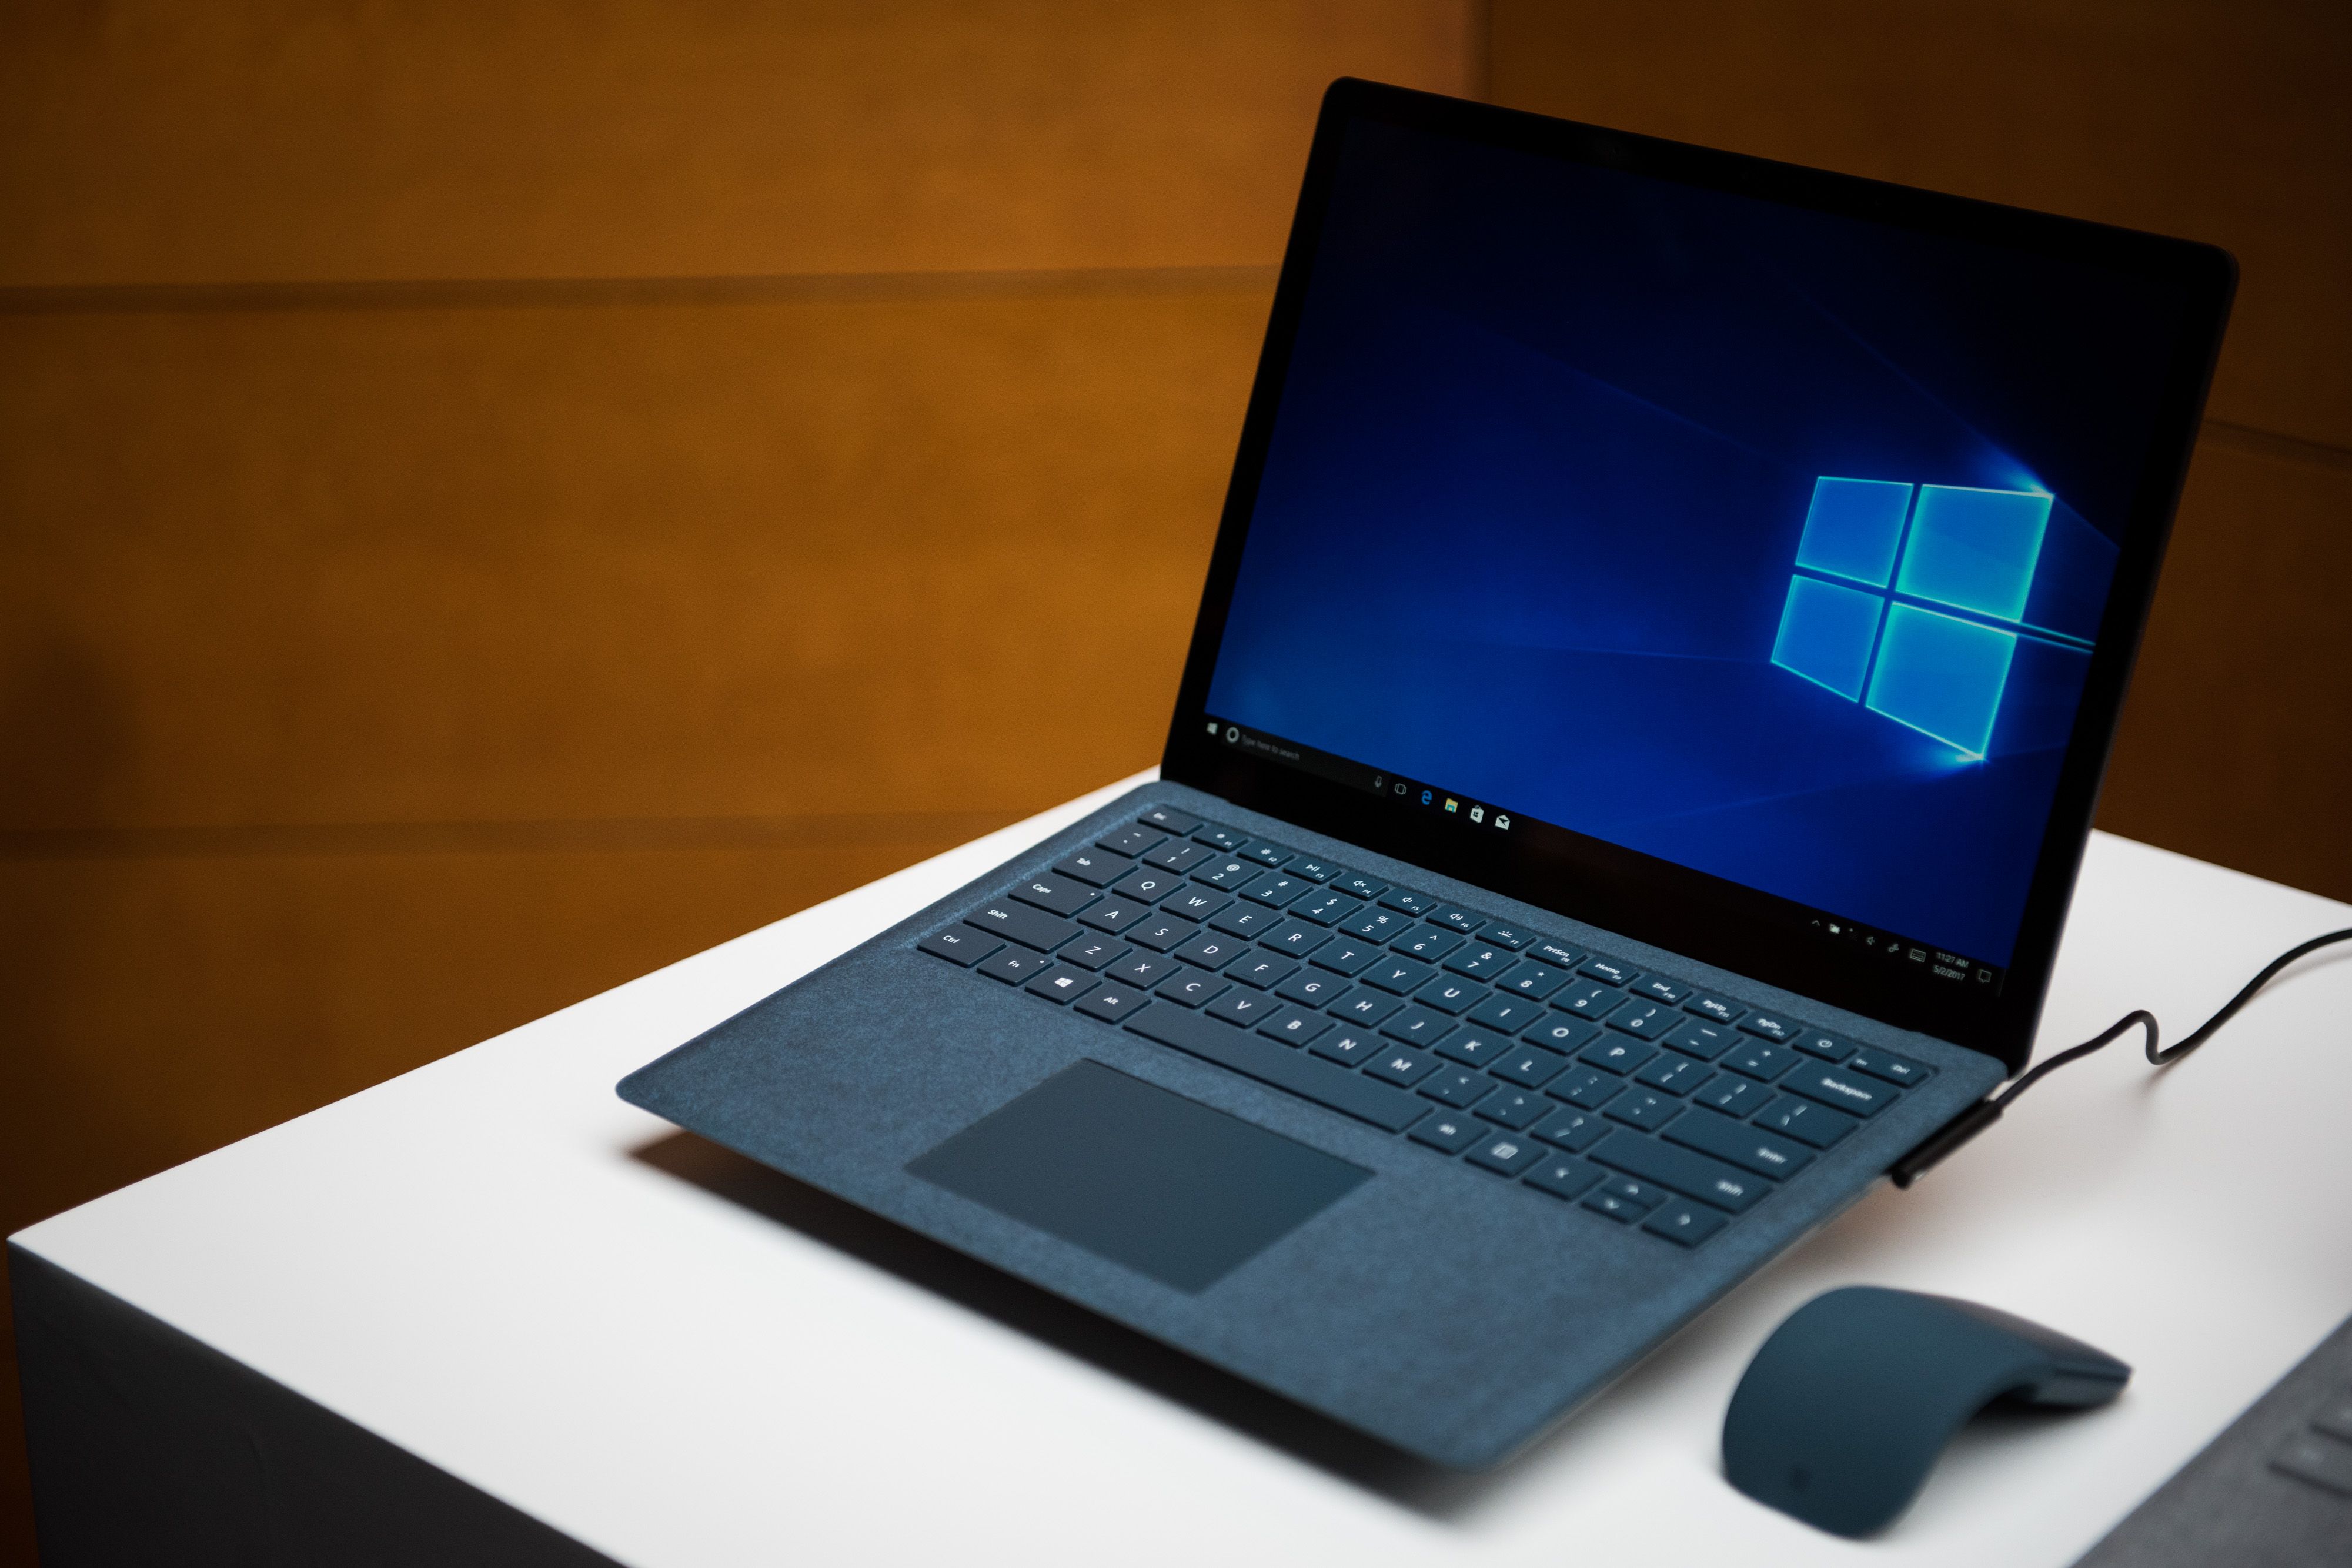 Microsoft Surface laptop launched running Windows 10 S